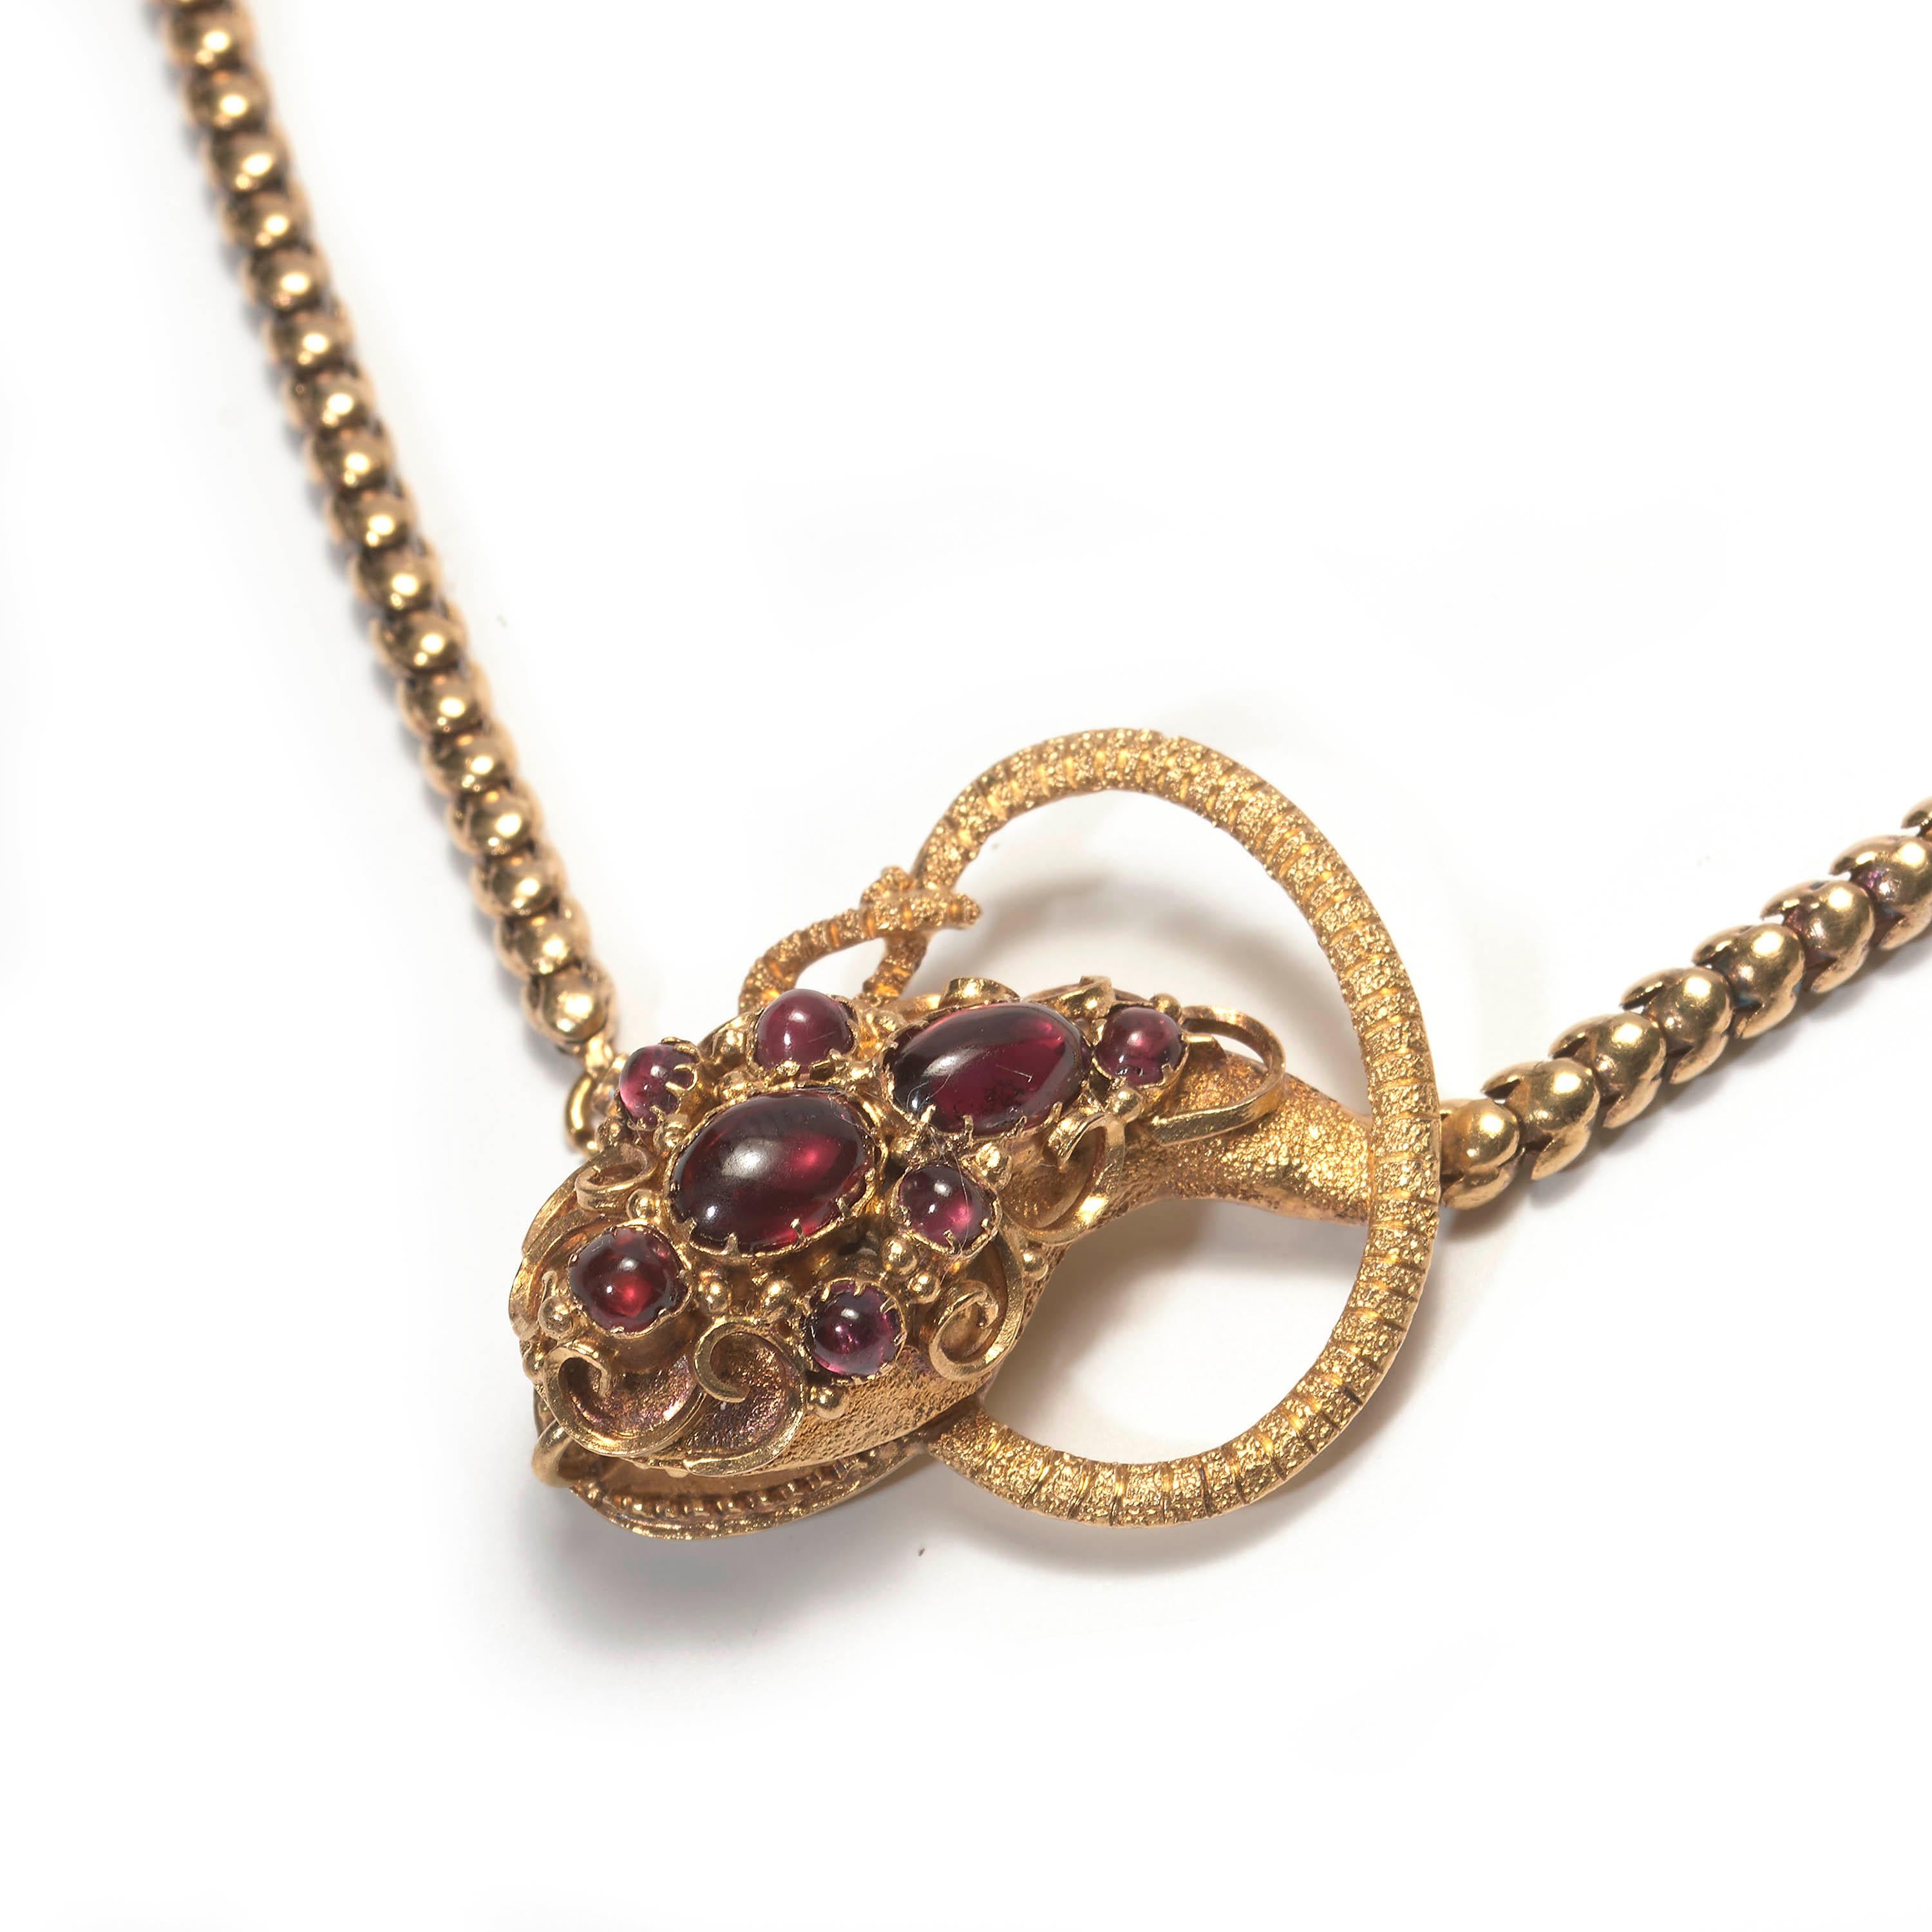 An early Victorian snake necklace, with eight cabochon-cut garnets set in the head, in closed back claw settings, surrounded by scrolling wirework, the mouth is open, with pointed teeth, with a tapering, articulated scale ring link body and an